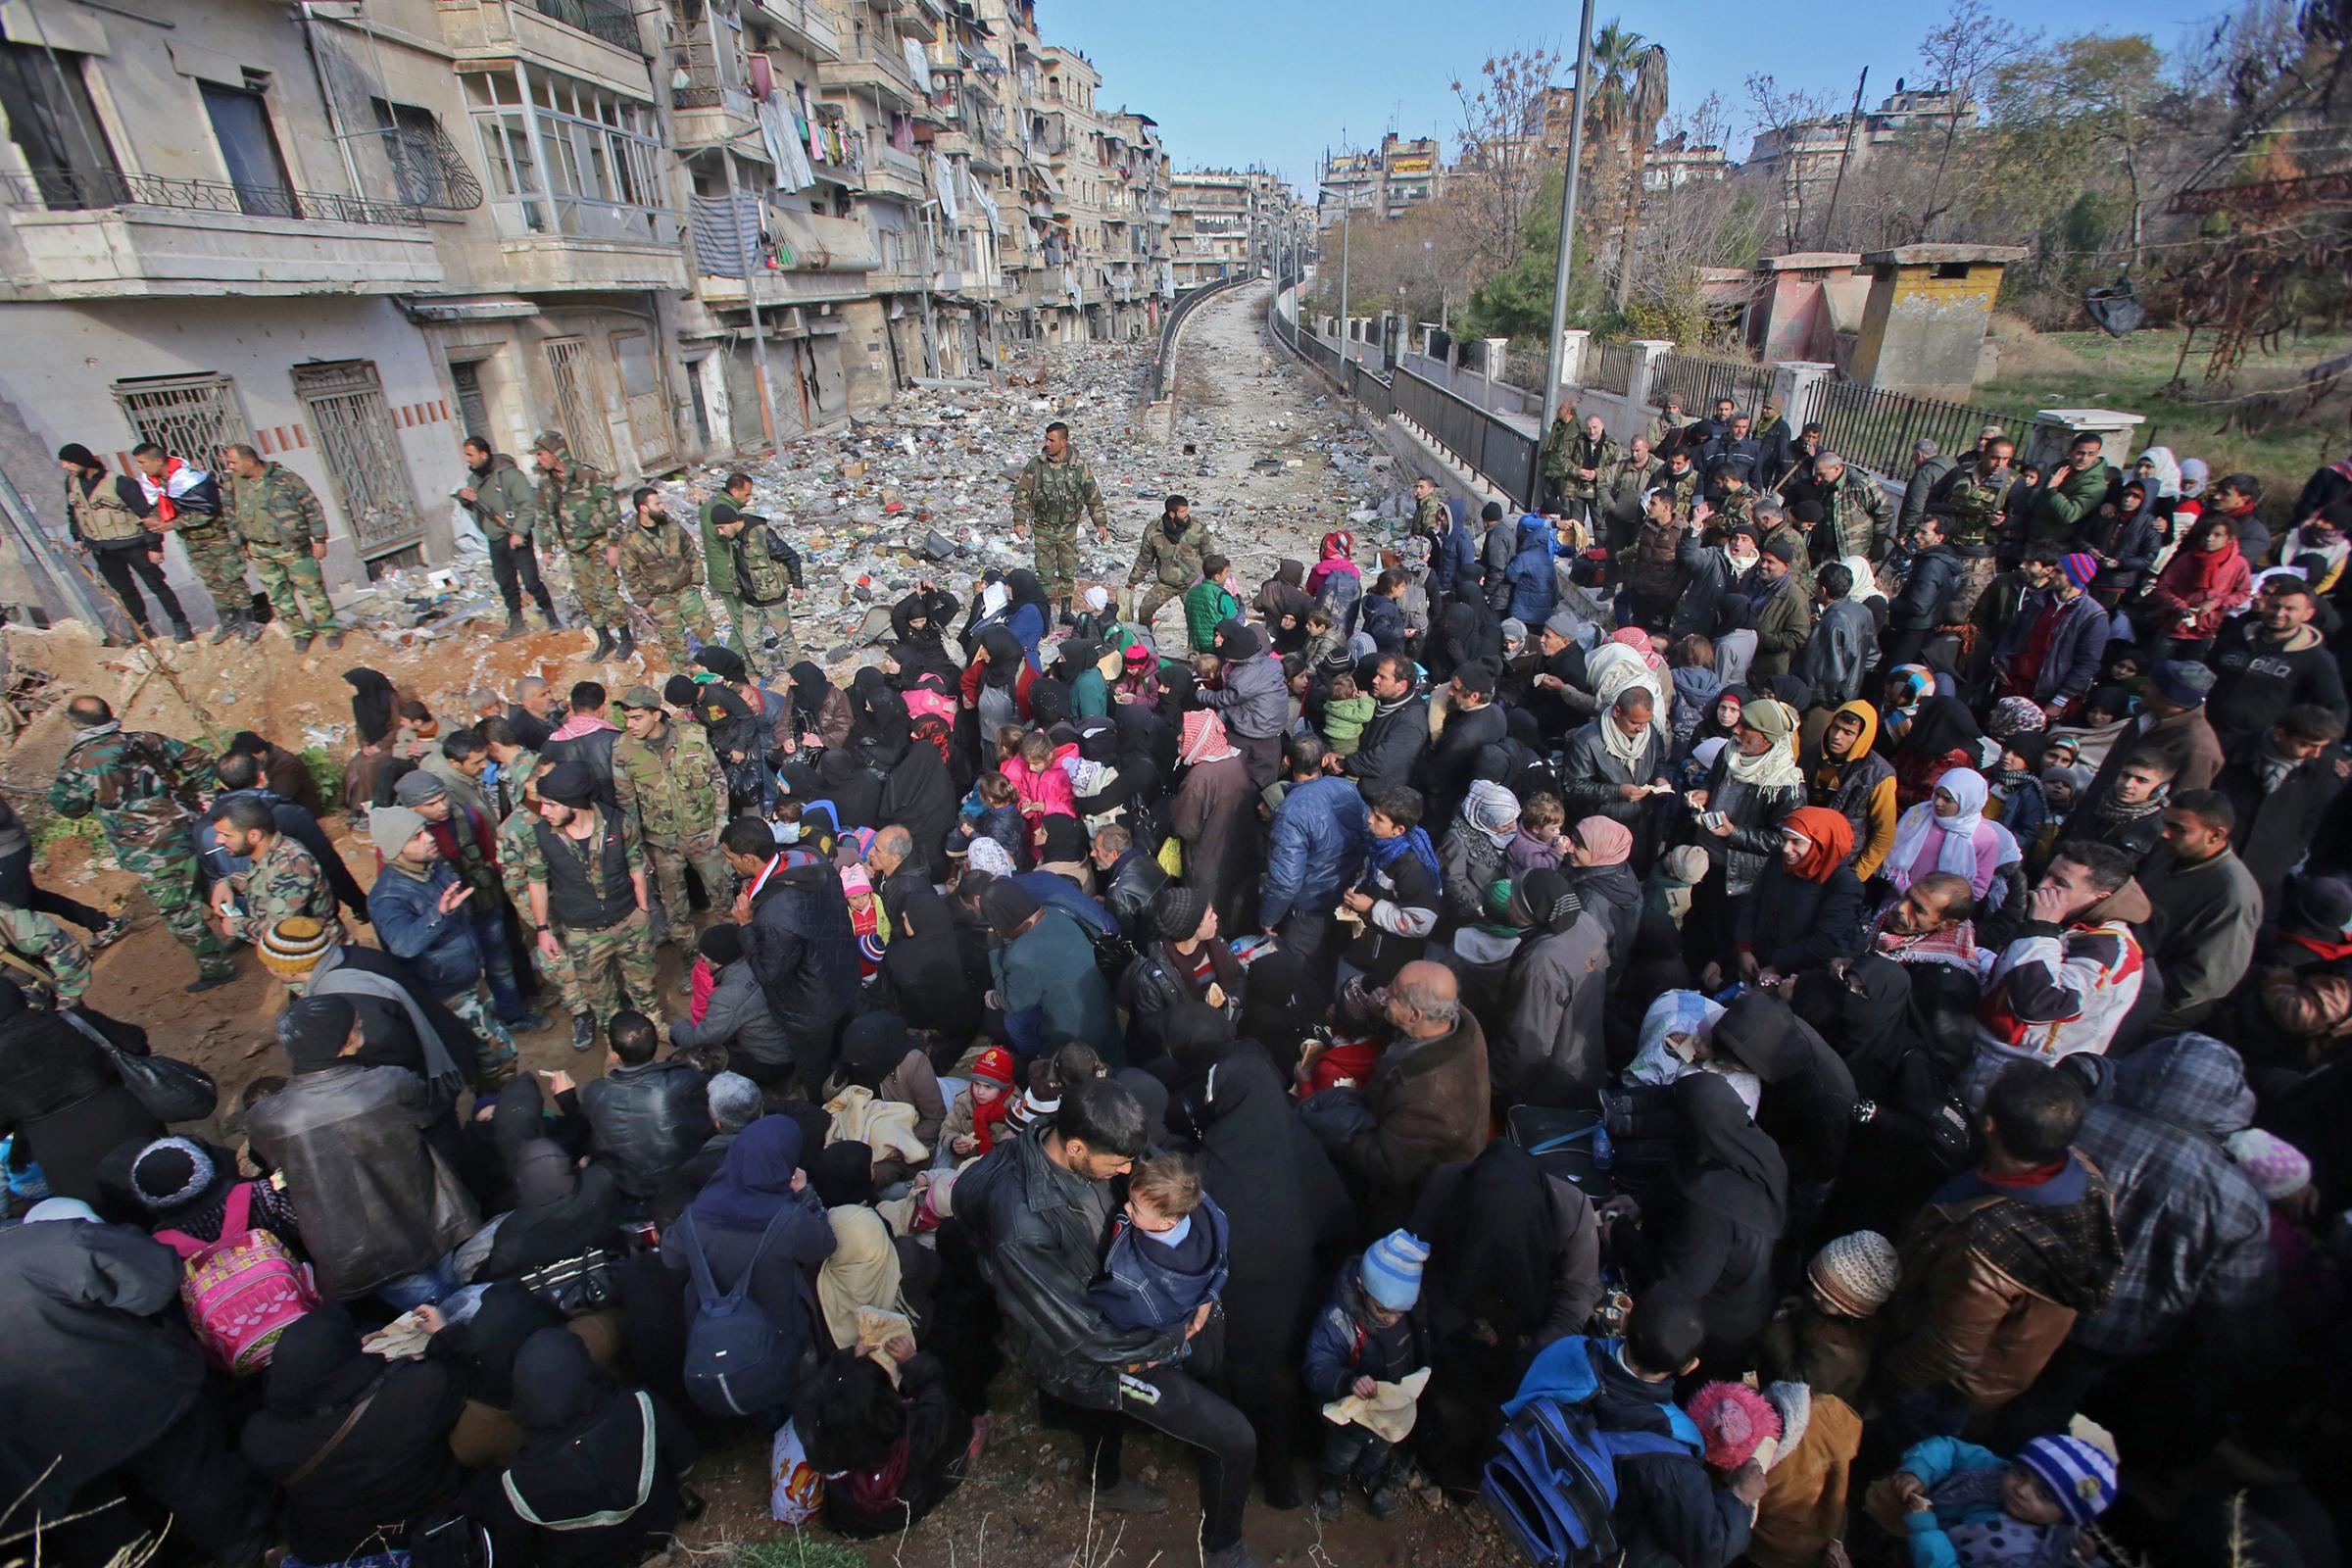 Residents fleeing the violence gather at a checkpoint, manned by pro-government forces, in the Maysaloun neighborhood of Aleppo on Dec. 8, 2016.